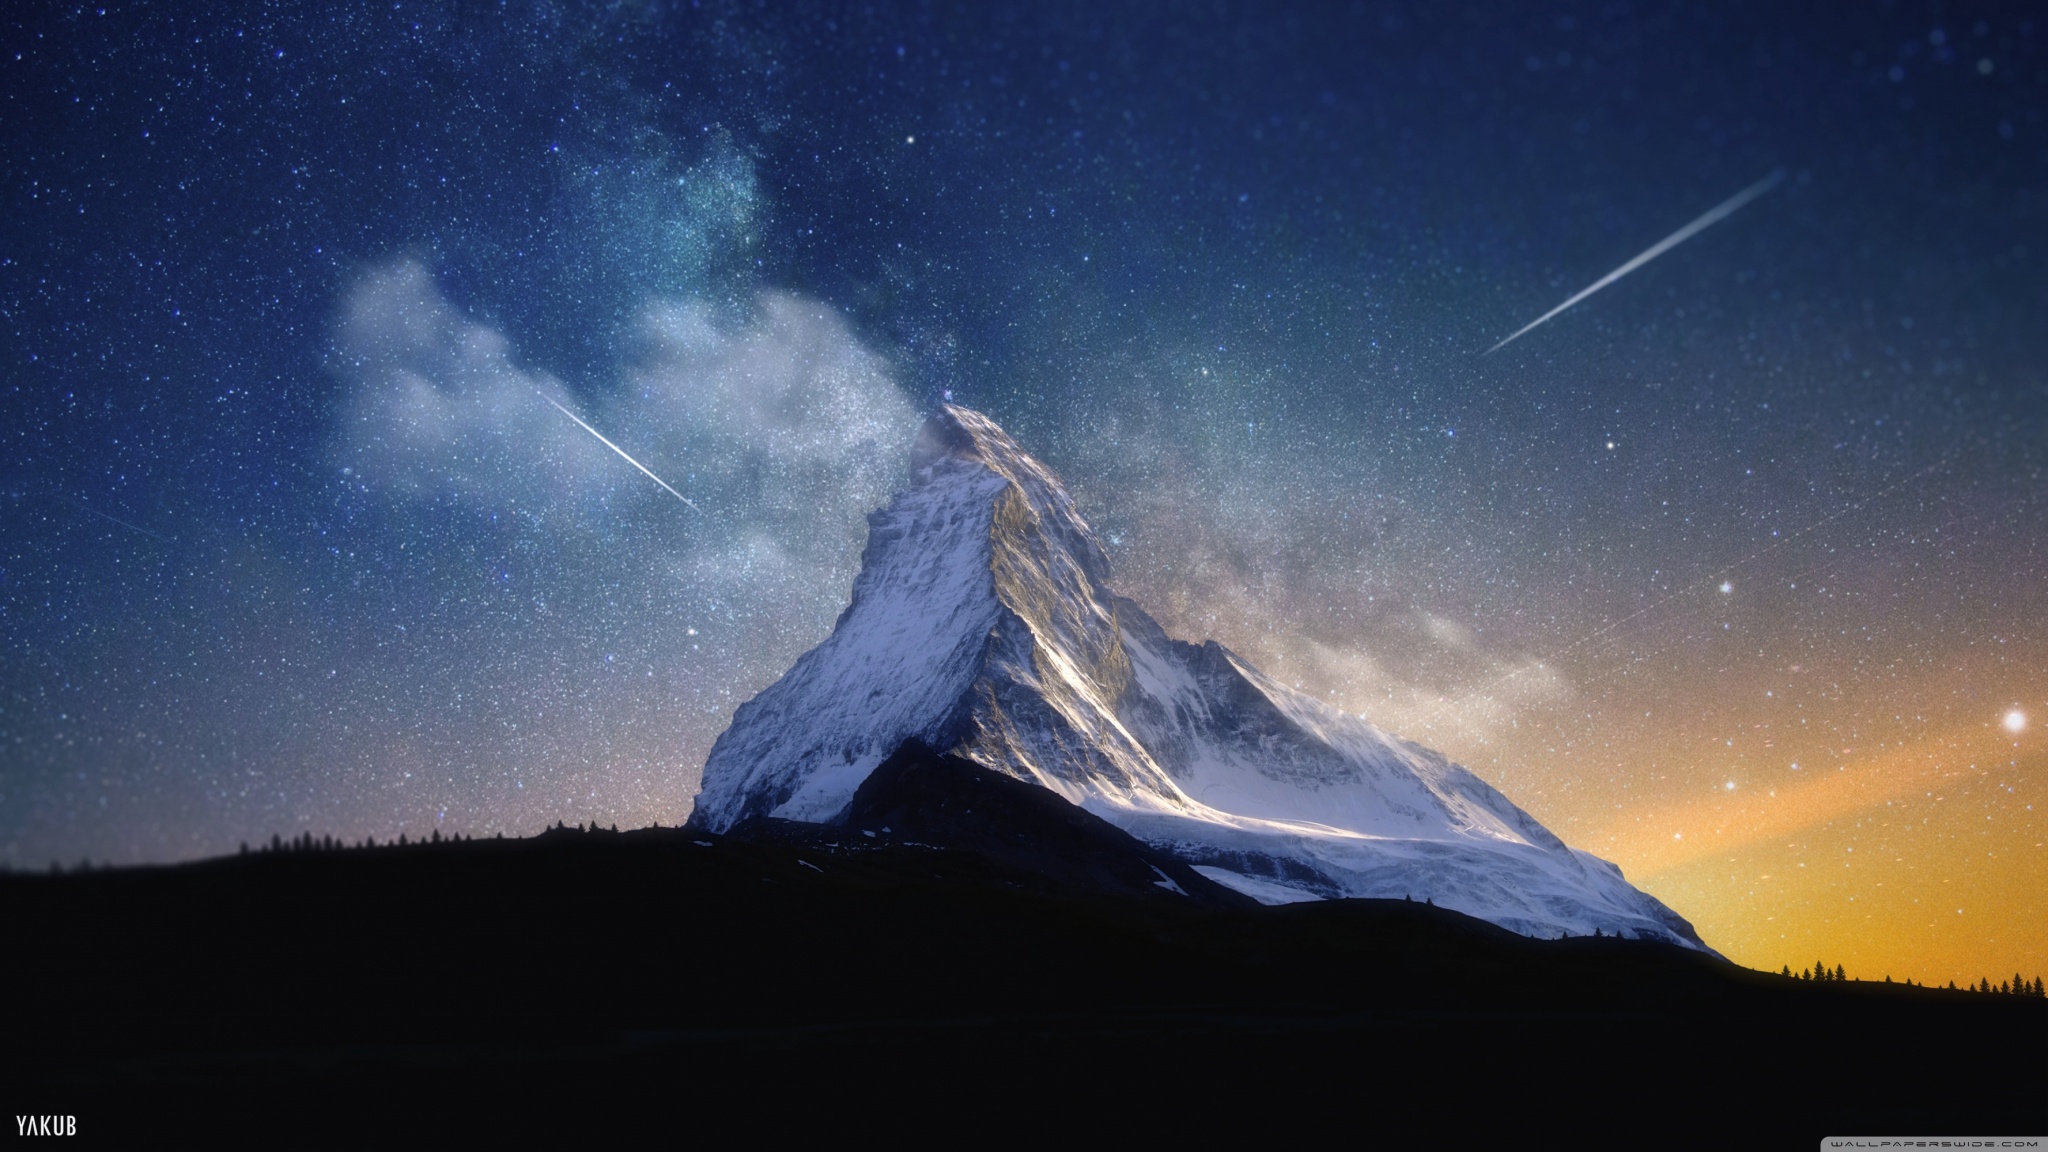 Mountain and Sky Full of Stars